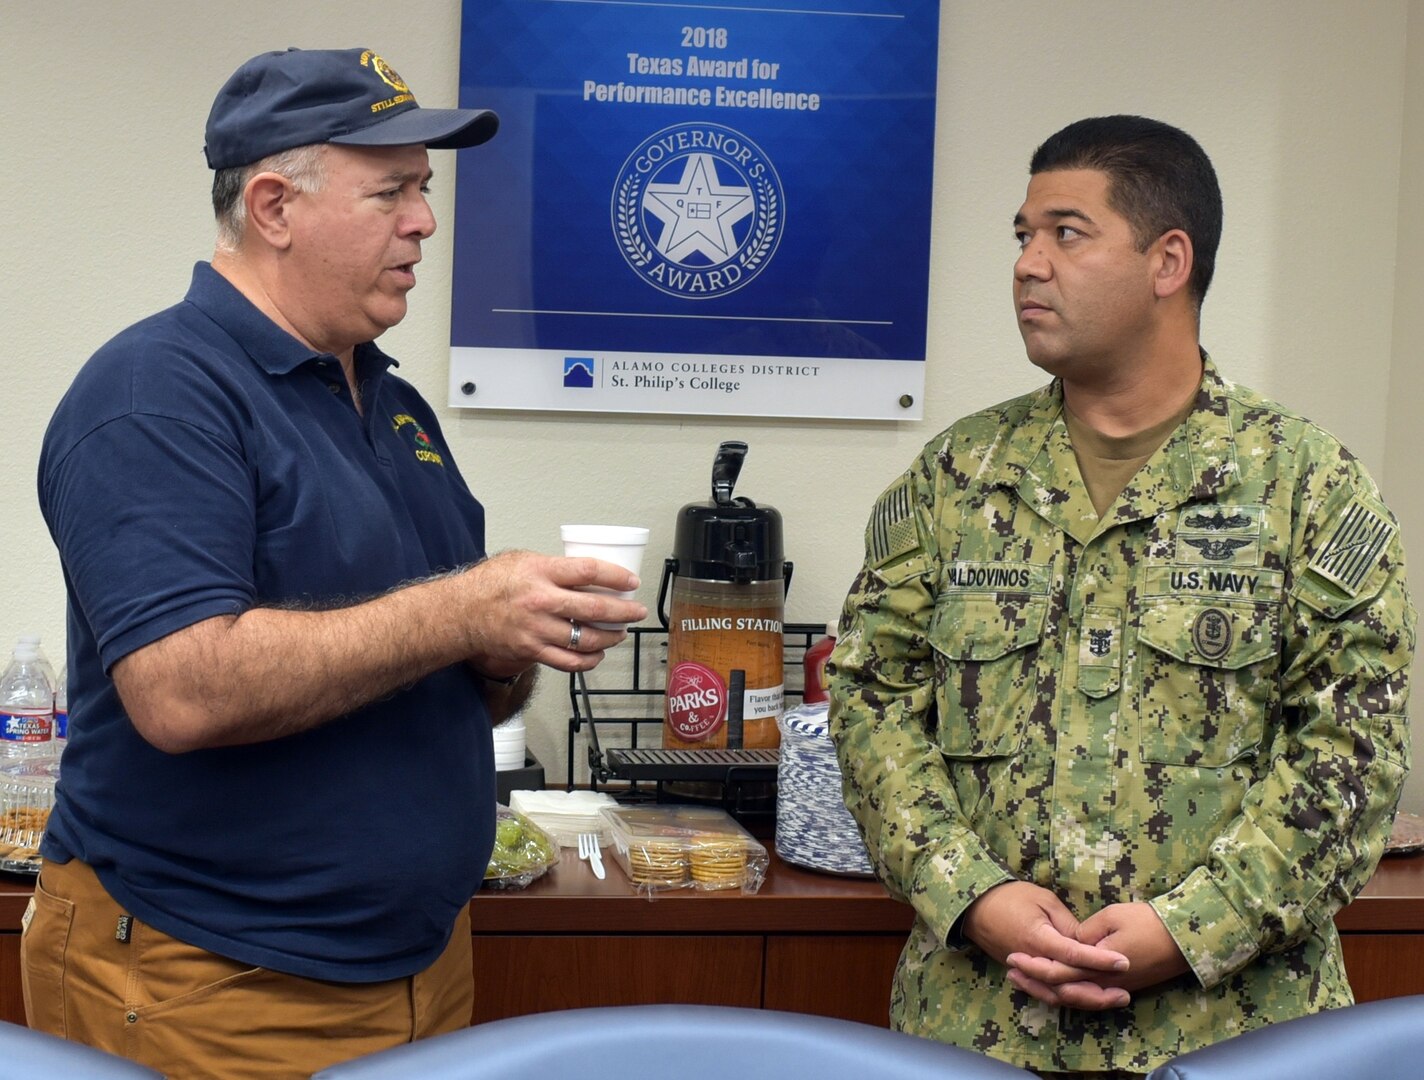 Retired Navy Capt. Humberto Quintanilla II speaks with Command Master Chief Francisco Valdovinos, Navy Recruiting District San Antonio, during a Recruiting District Assistance Council meeting at St. Philip's College's Good Samaritan Veterans Outreach and Transition Center Sept. 26.  RDAC members assist Navy recruiting by joining talents available in Navy-related organizations, the civilian community, and the Naval Reserve.